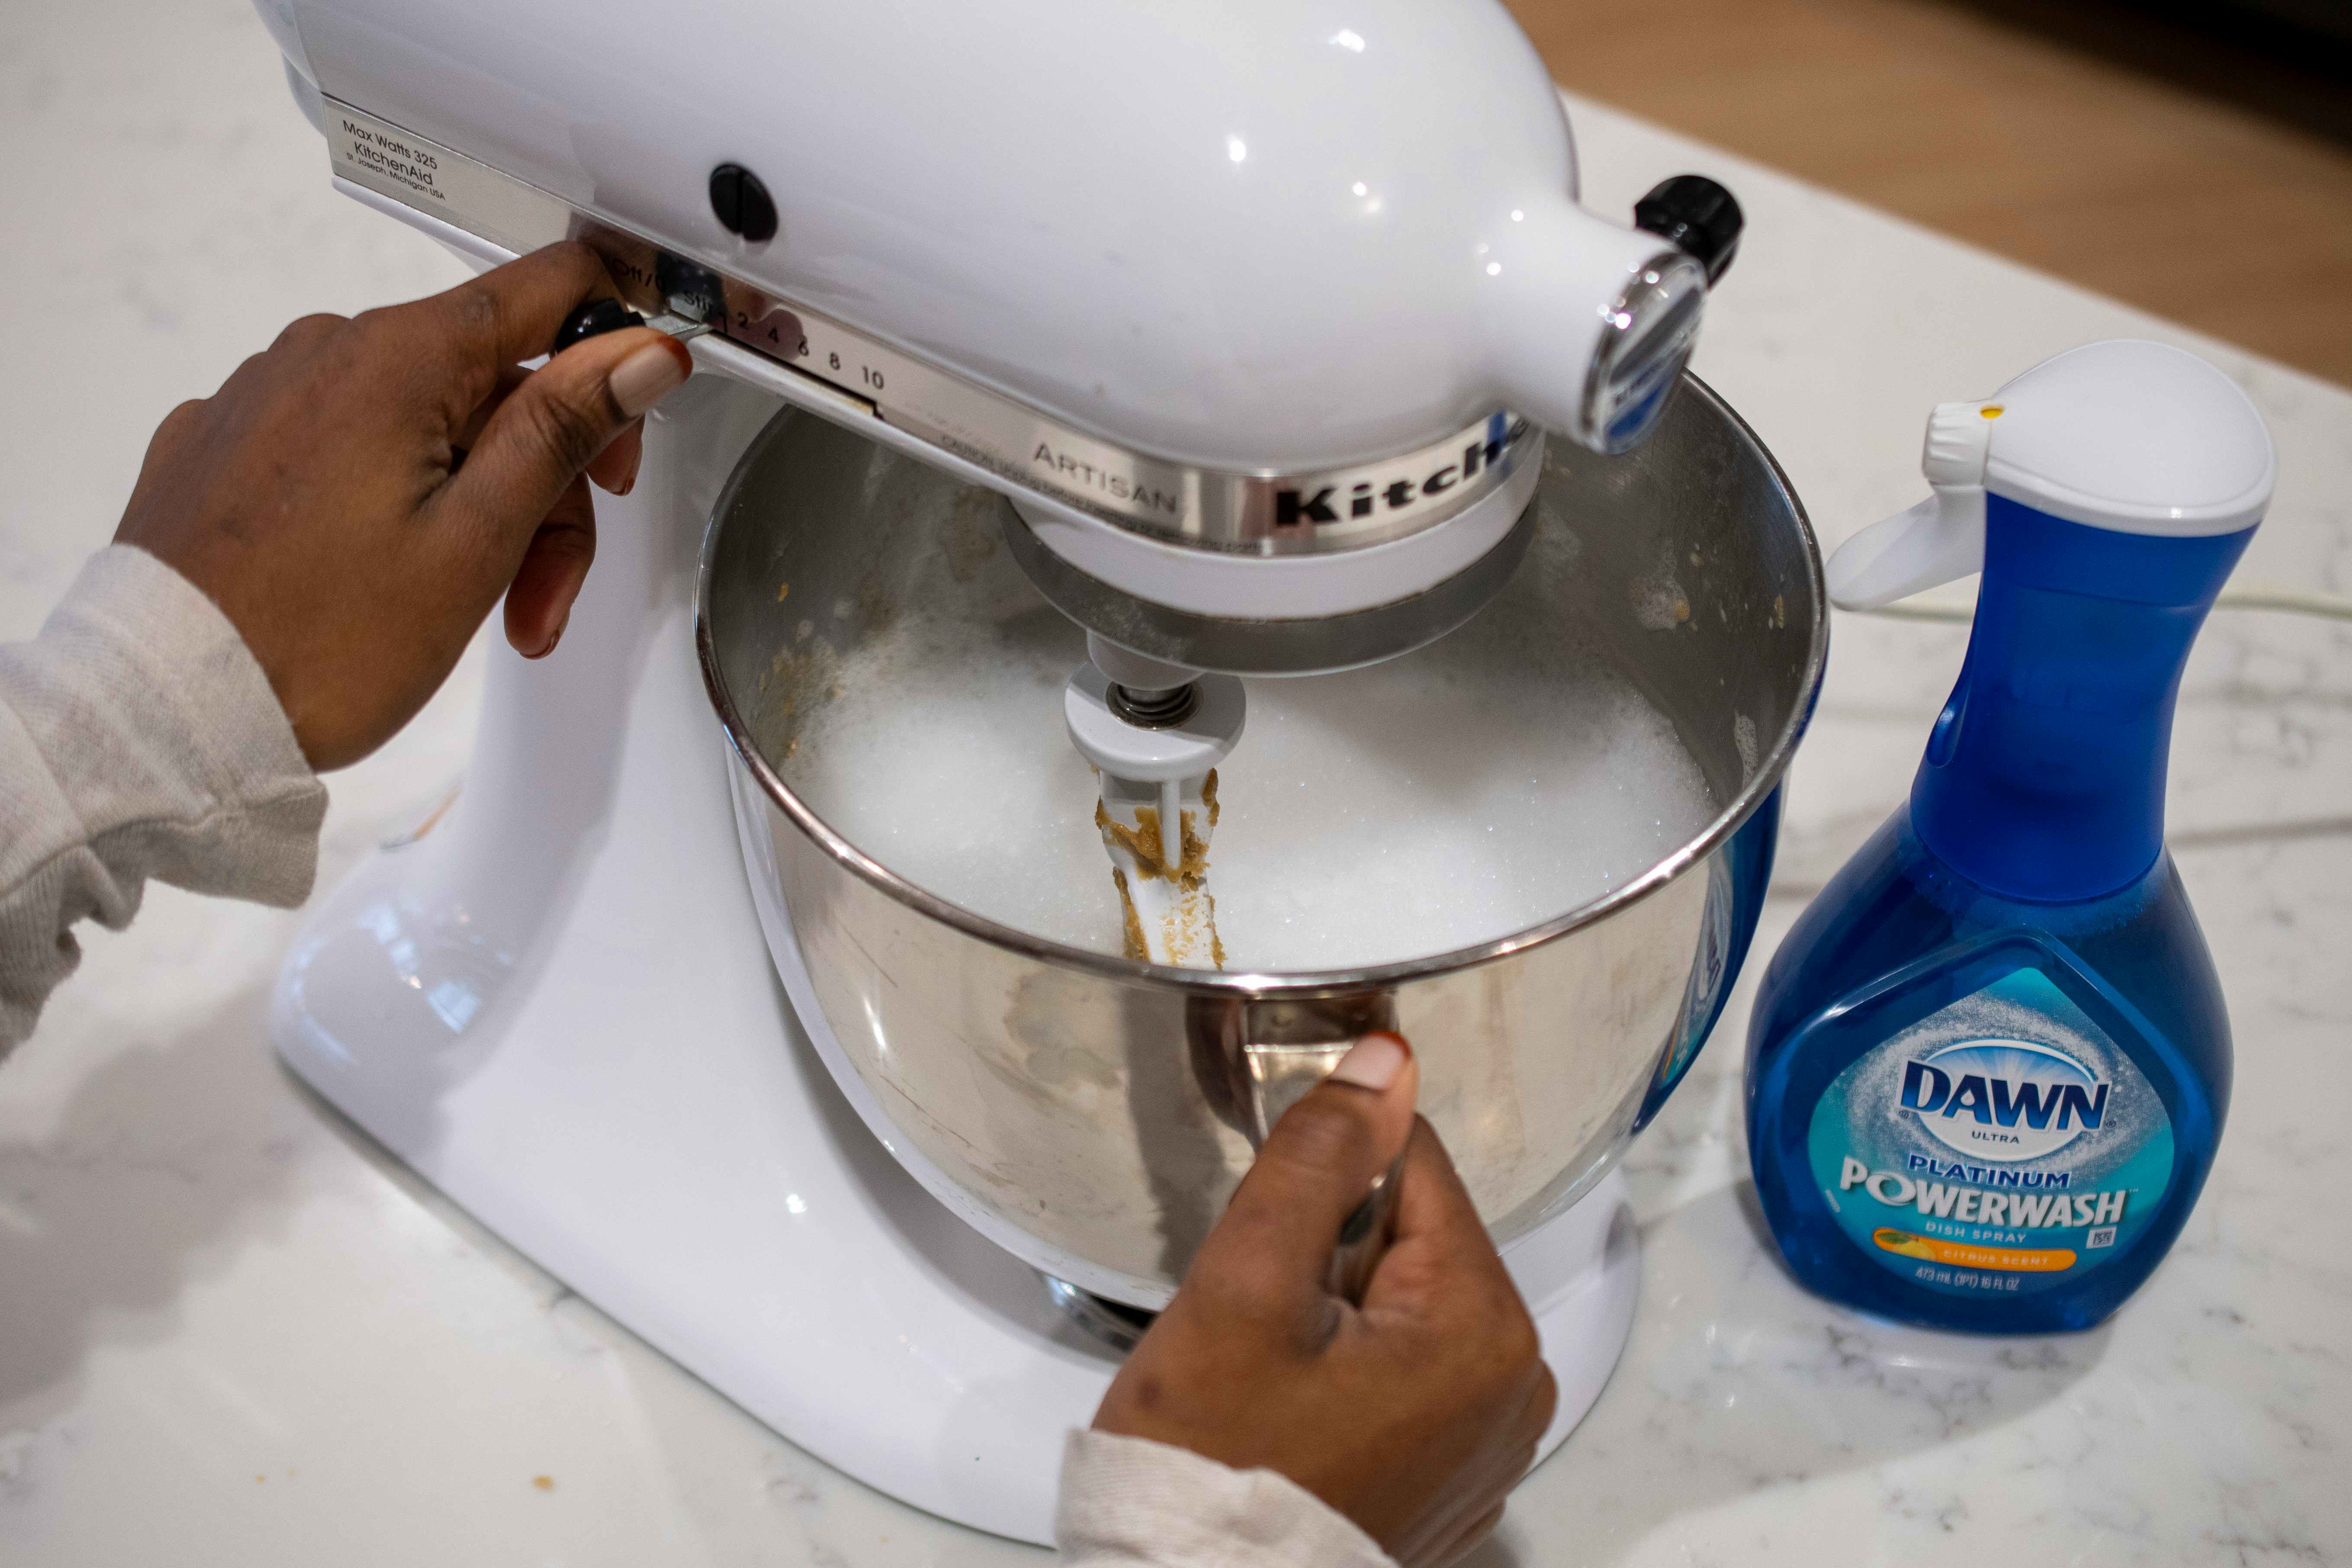 7 Tricks For Finding a KitchenAid Mixer Sale to Get the Best Price - The  Krazy Coupon Lady